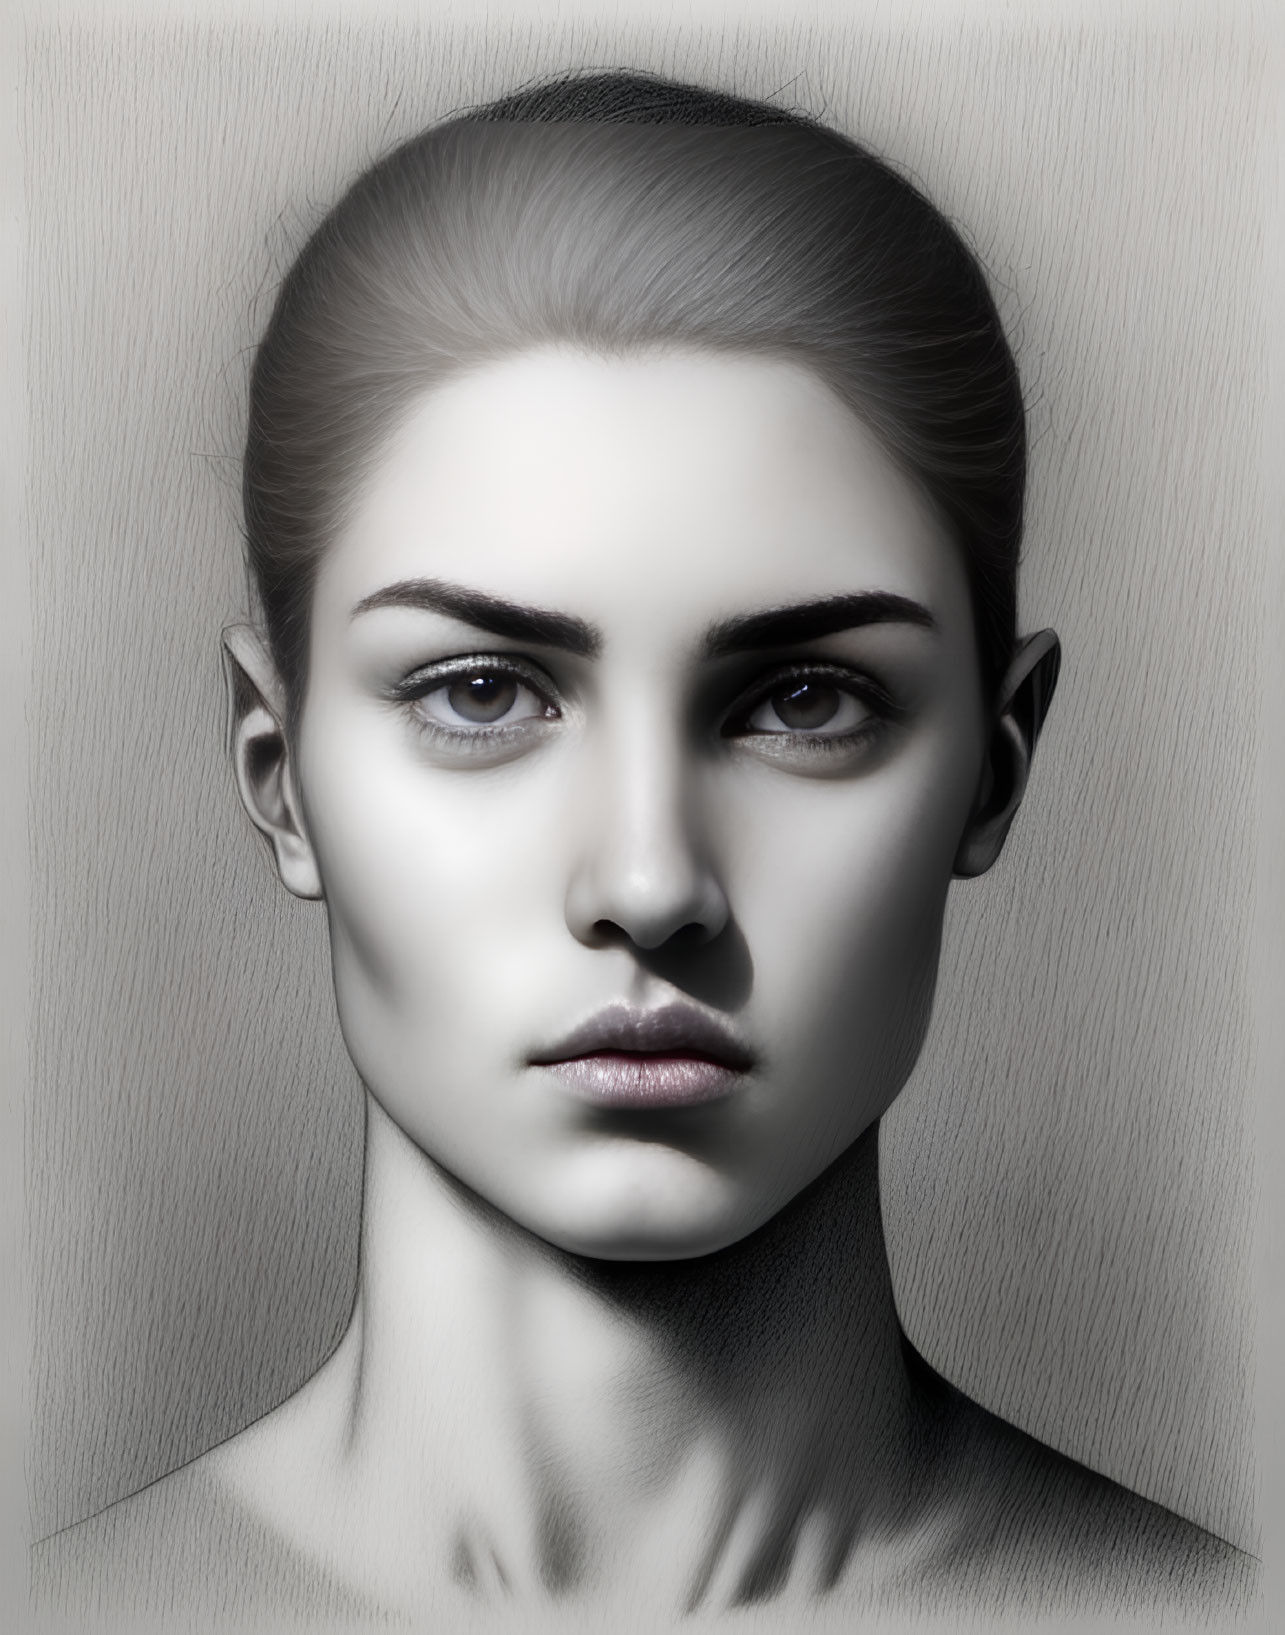 Detailed Black and White Digital Portrait of Woman with Striking Eyes